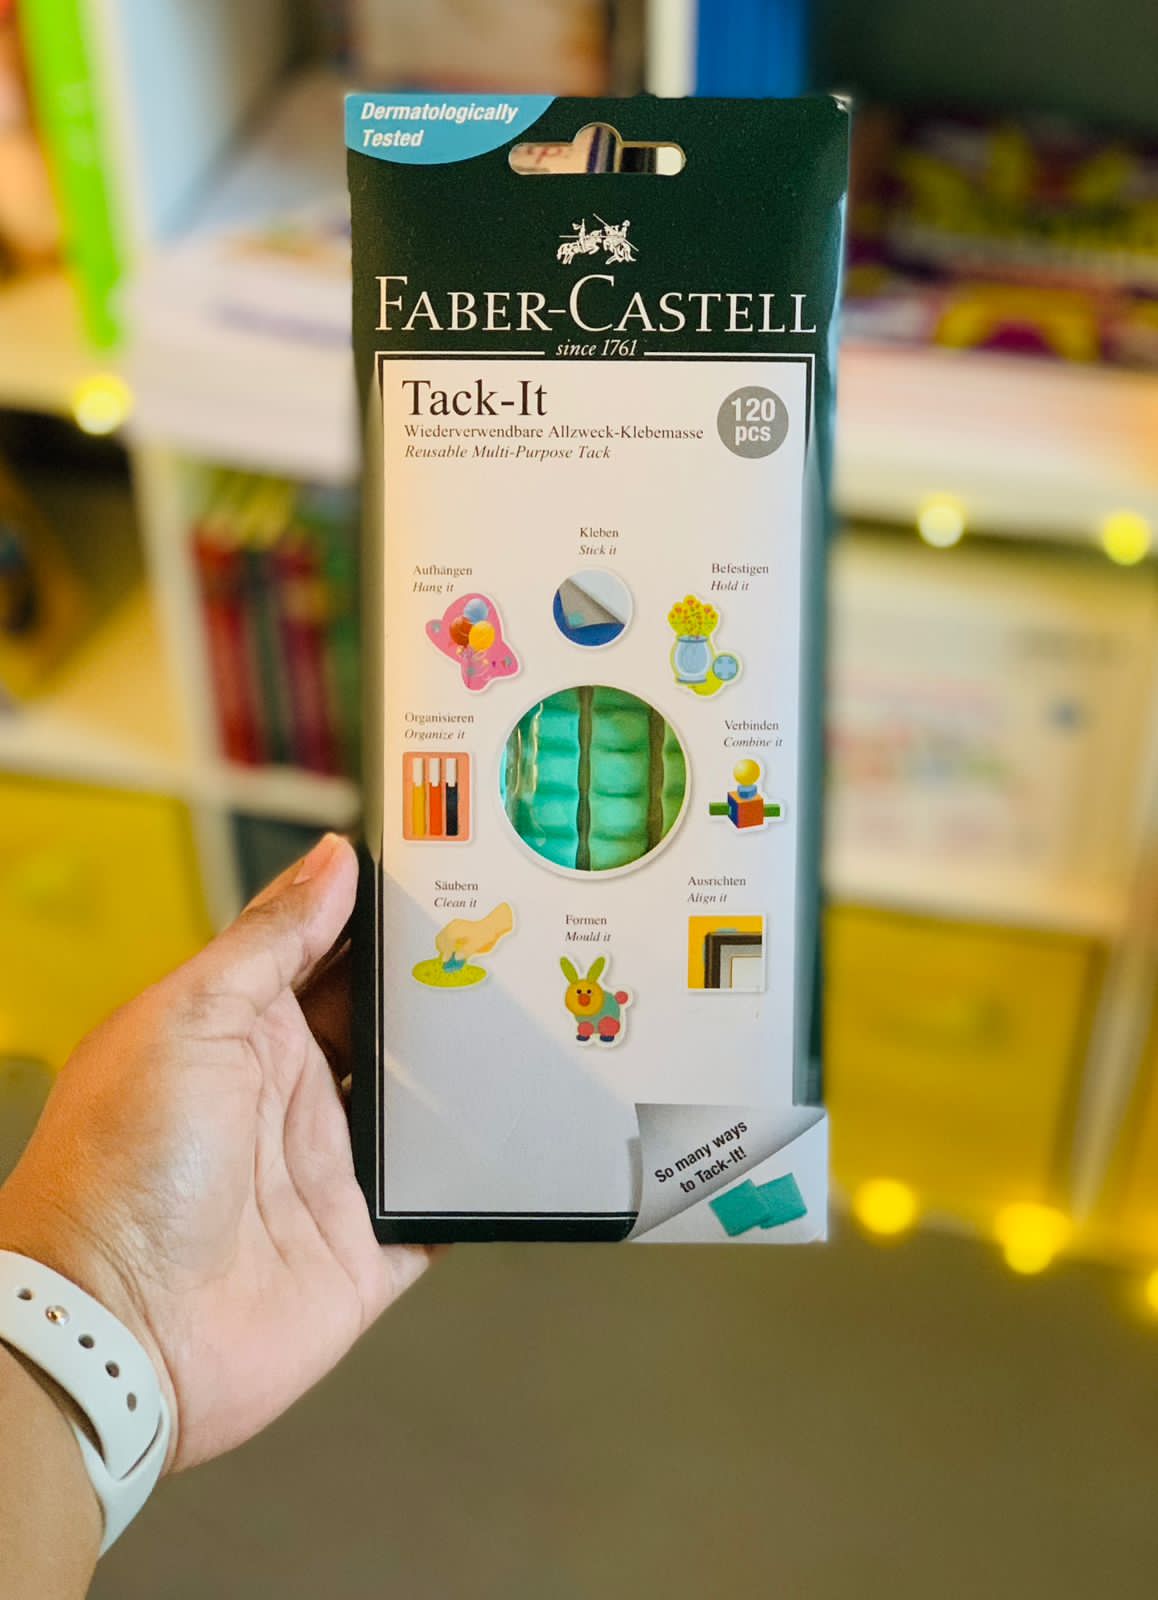 SG_B075QDRJWZ_US Faber-Castell Reusable Removable Adhesive Tacky Putty  White Tack, Poster & Multipurpose Wall Safe Sticky Tack (120 Pieces)